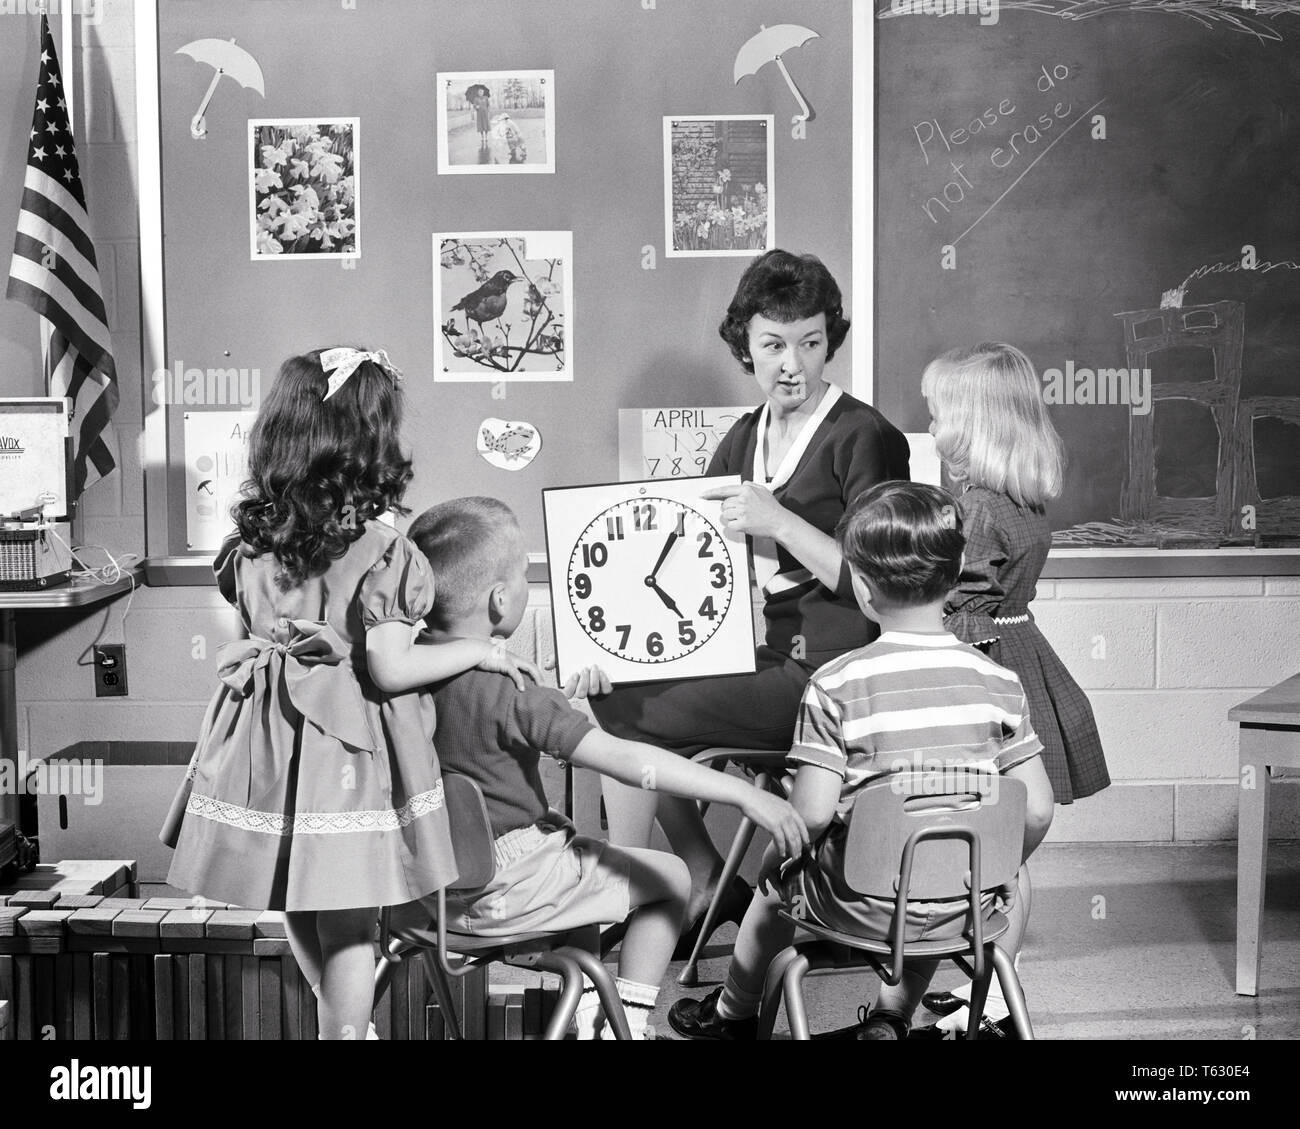 1950s 1960s KINDERGARTEN TEACHER WITH  4 STUDENTS TEACHING THEM HOW TO TELL TIME ON A CLOCK - s13148 HAR001 HARS INFORMATION LIFESTYLE FIVE FEMALES 5 HALF-LENGTH LADIES PERSONS CARING MALES NUMBERS B&W SCHOOLS GRADE KINDERGARTEN HOW INSTRUCTOR KNOWLEDGE HOURS TELLING AUTHORITY OCCUPATIONS PRIMARY MINUTES CONCEPT CONNECTION CONCEPTUAL EDUCATOR TELL K-12 EDUCATING EDUCATORS GRADE SCHOOL INSTRUCTORS JUVENILES MID-ADULT MID-ADULT WOMAN SCHOOL TEACHES TOGETHERNESS BLACK AND WHITE CAUCASIAN ETHNICITY HAR001 OLD FASHIONED Stock Photo